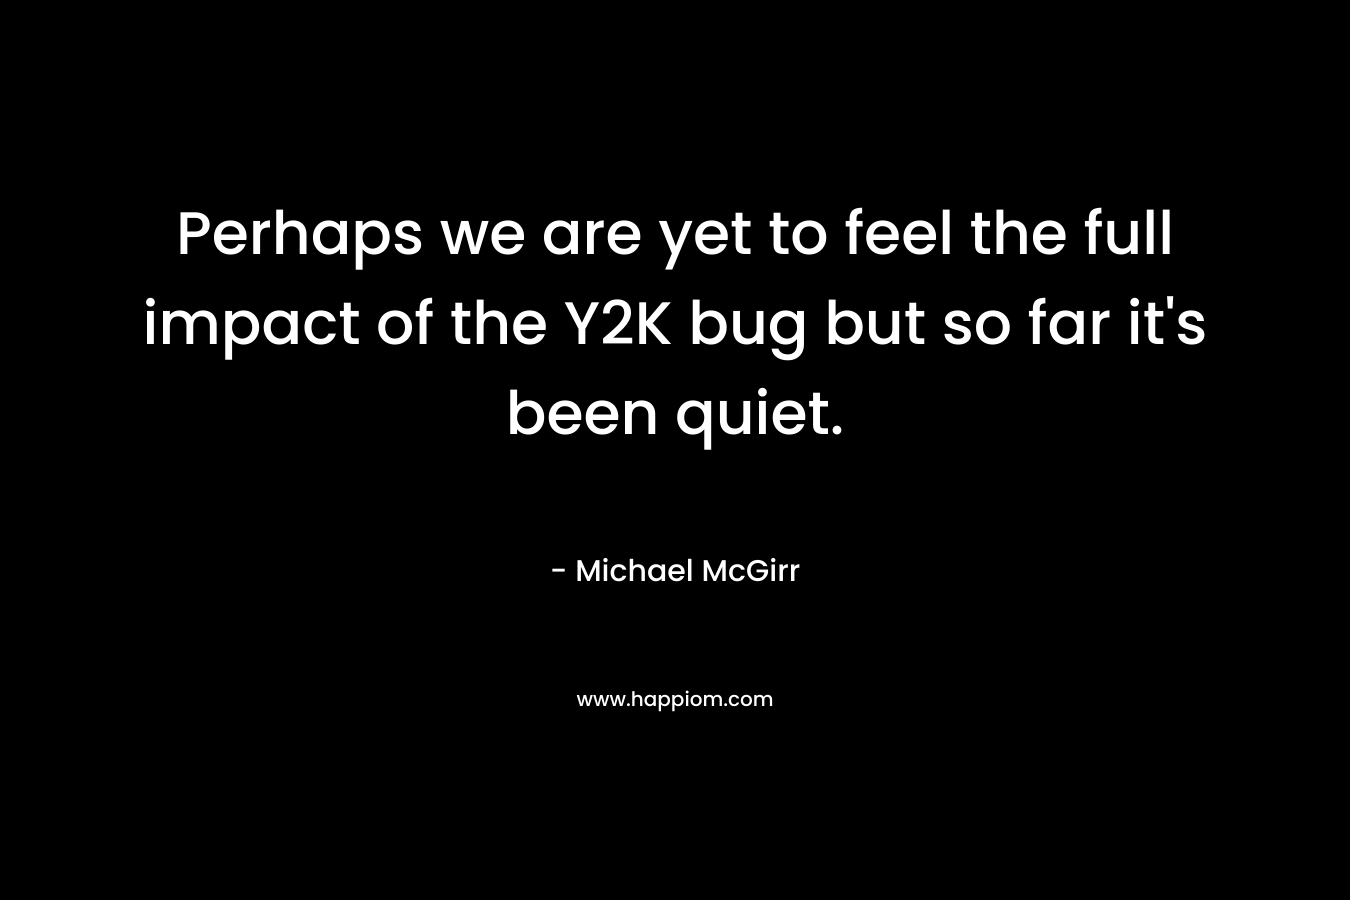 Perhaps we are yet to feel the full impact of the Y2K bug but so far it's been quiet.